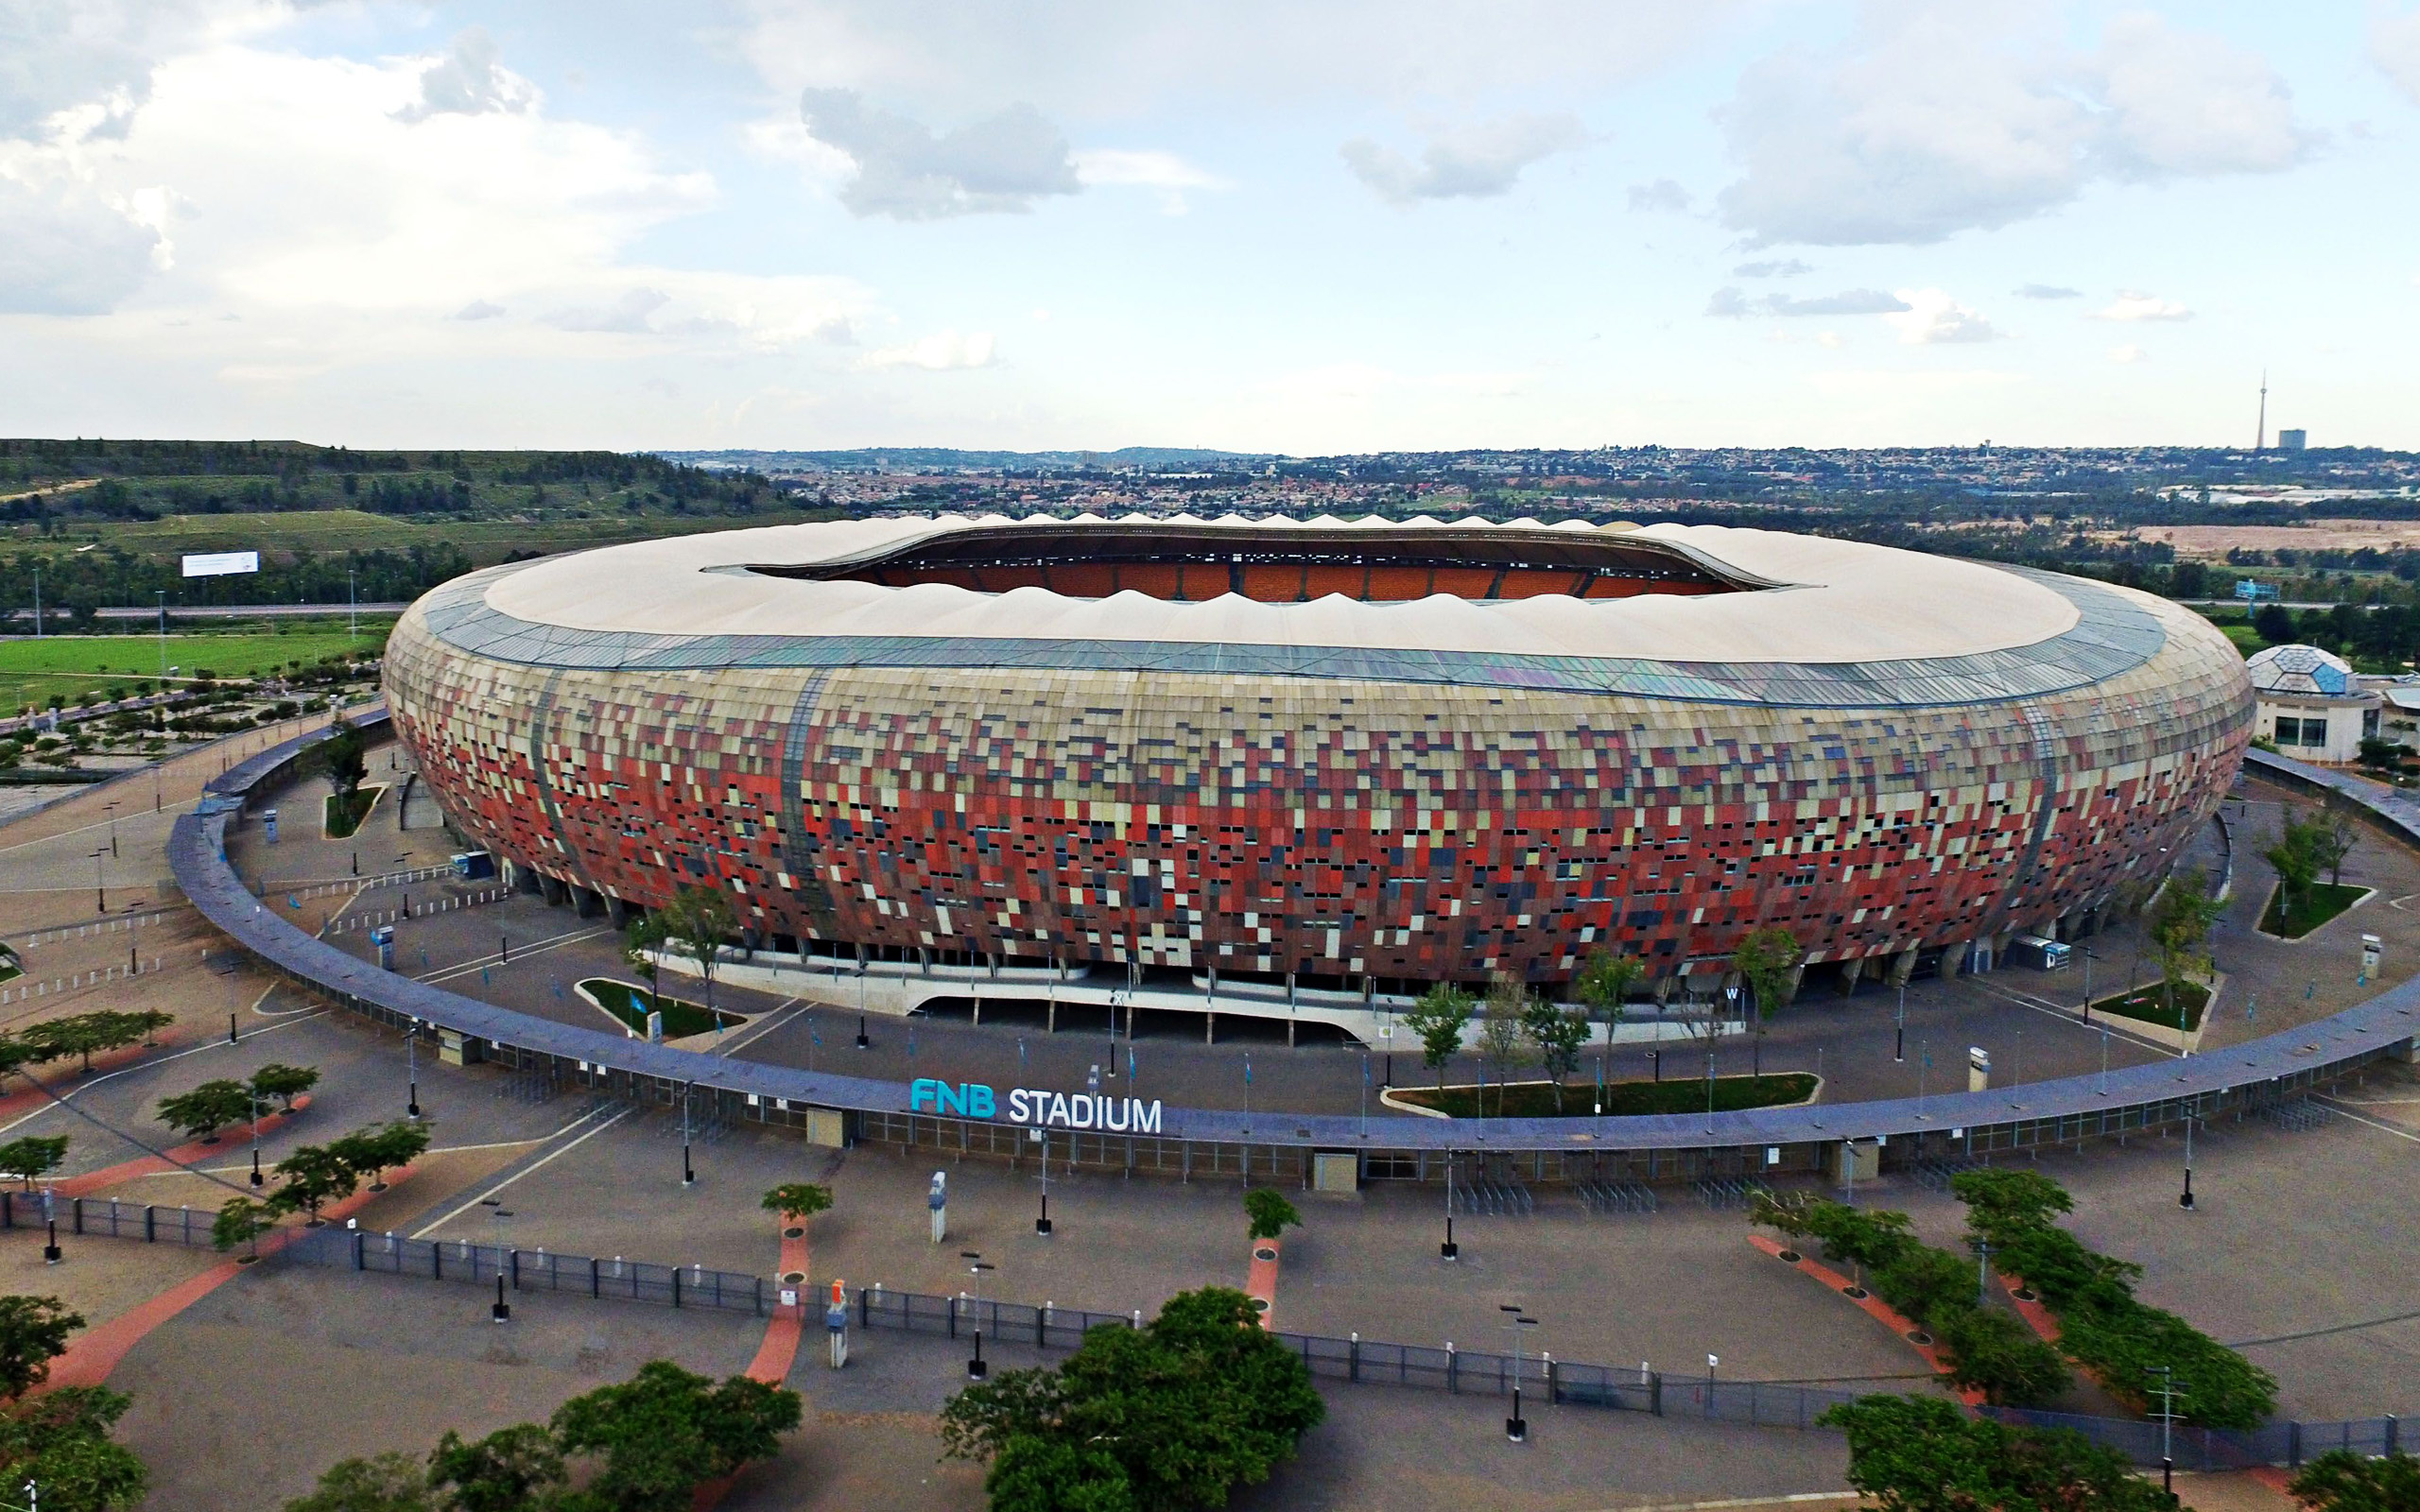 Download wallpaper Soccer City, First National Bank Stadium, FNB Stadium, football stadium, Johannesburg, South Africa, modern stadiums, South African stadiums for desktop with resolution 2560x1600. High Quality HD picture wallpaper